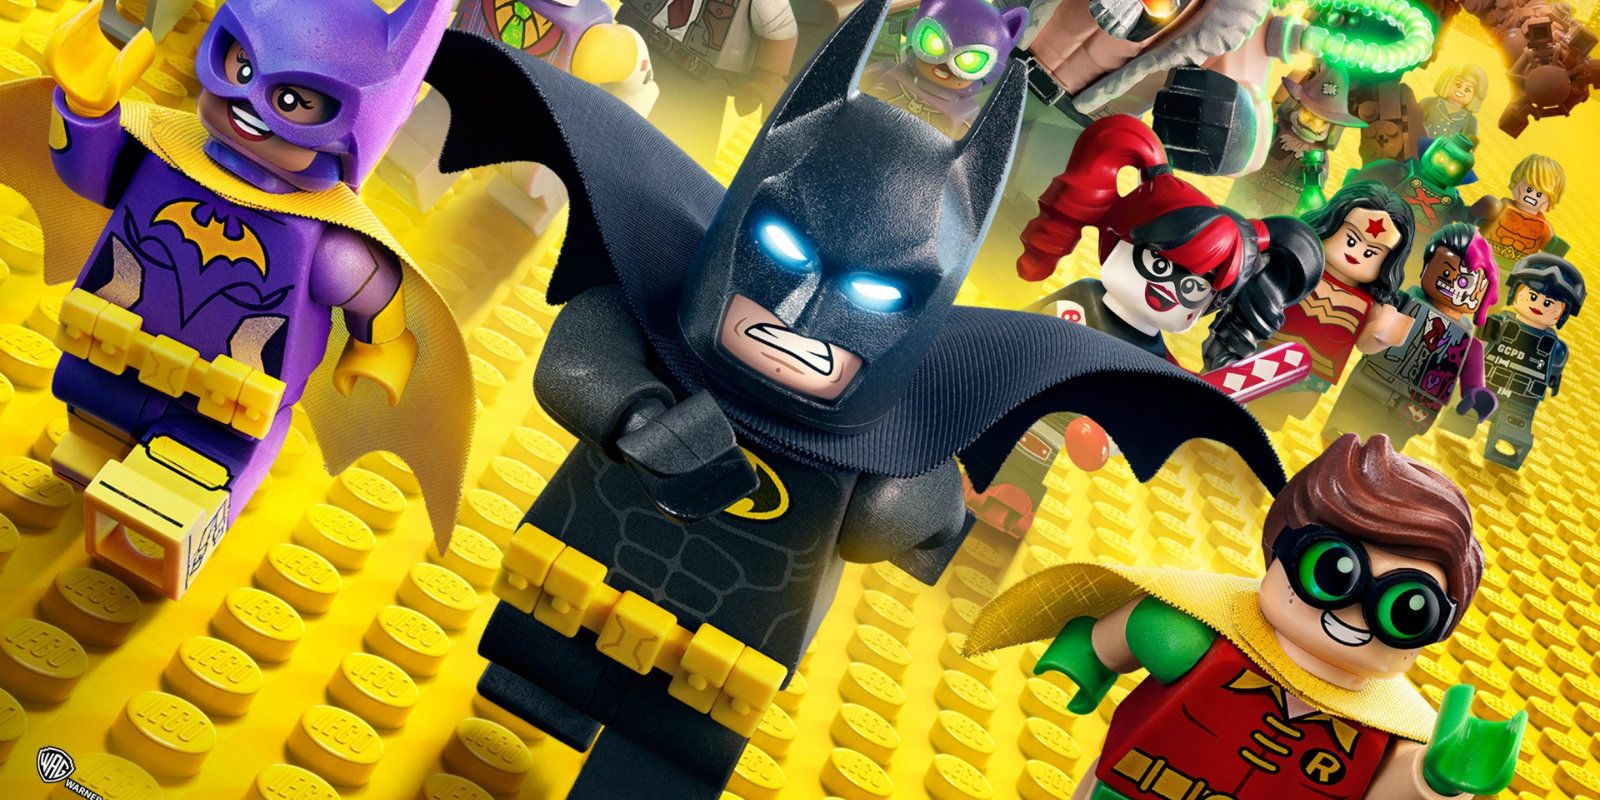 The LEGO Batman Movie Poster (cropped)